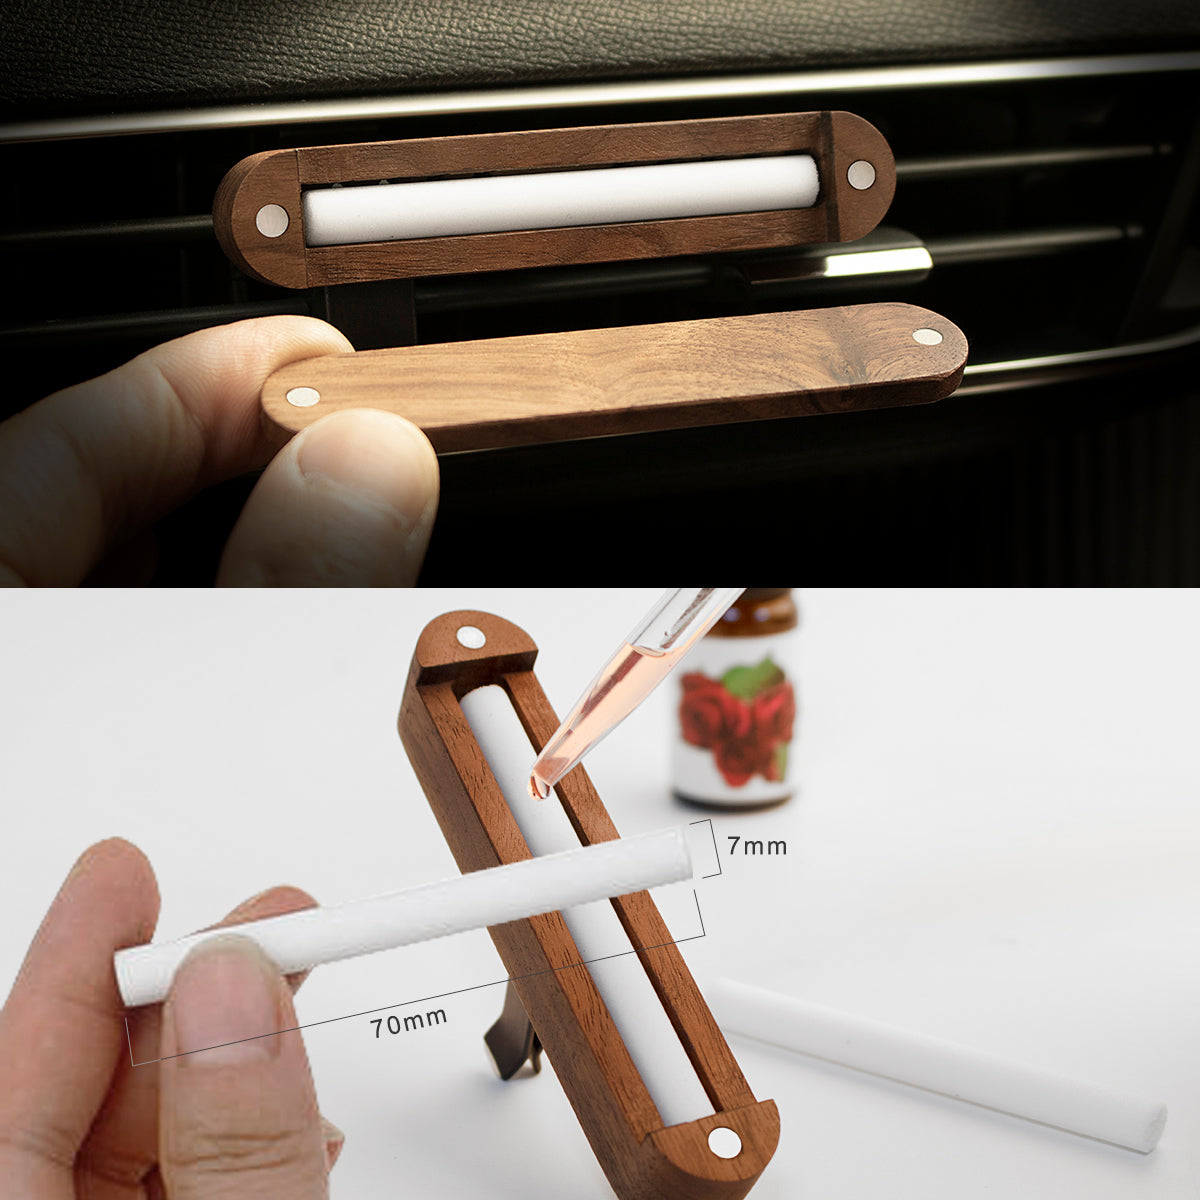 Car Air Fresheners Vent Clip 2PCS｜You can add your favorite essential oils at will to create the scent you want in the car.